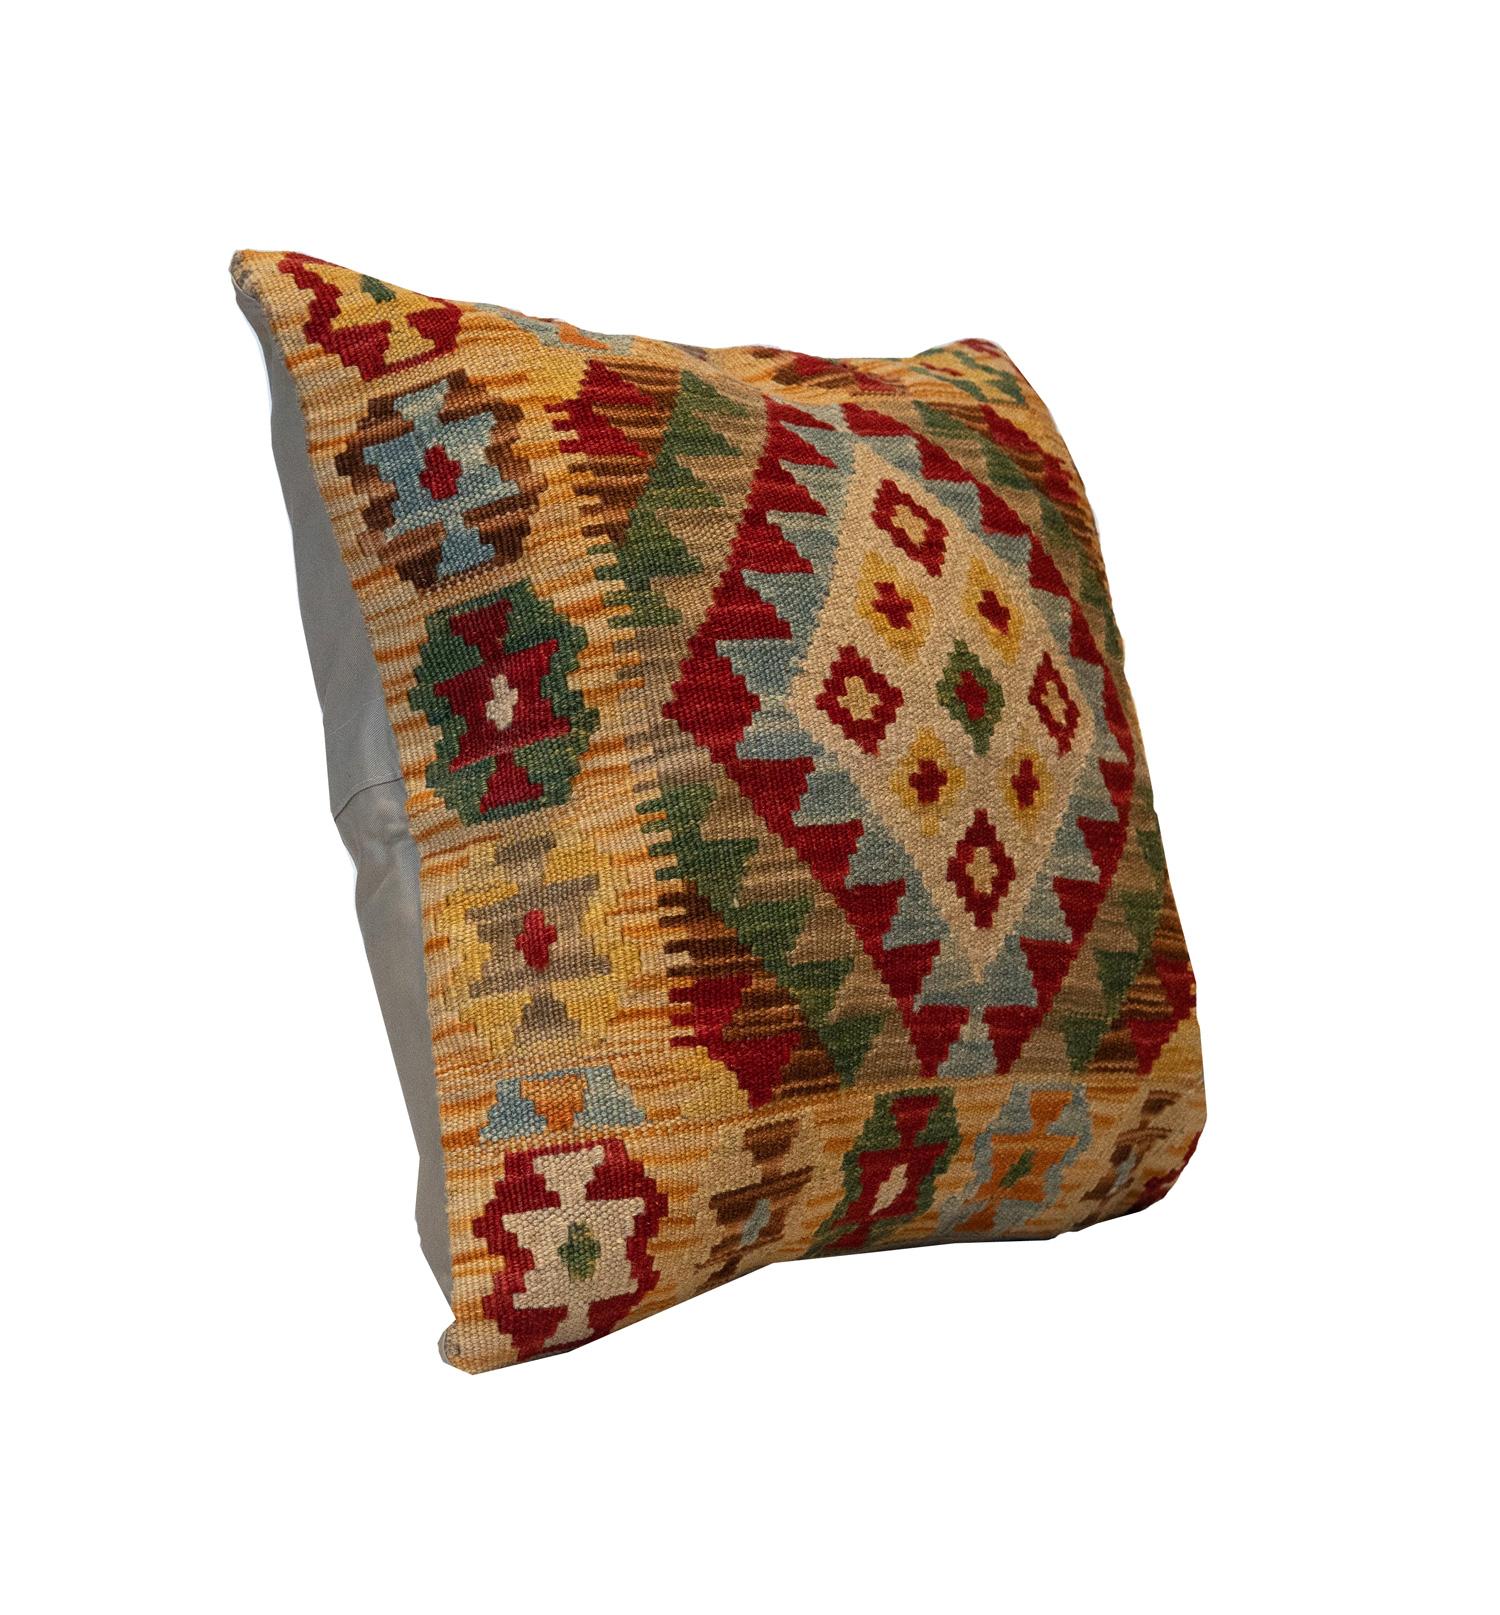 Late 20th Century Wool Geometric Pillow Traditional Kilim Cushion Cover Handwoven Beige Green